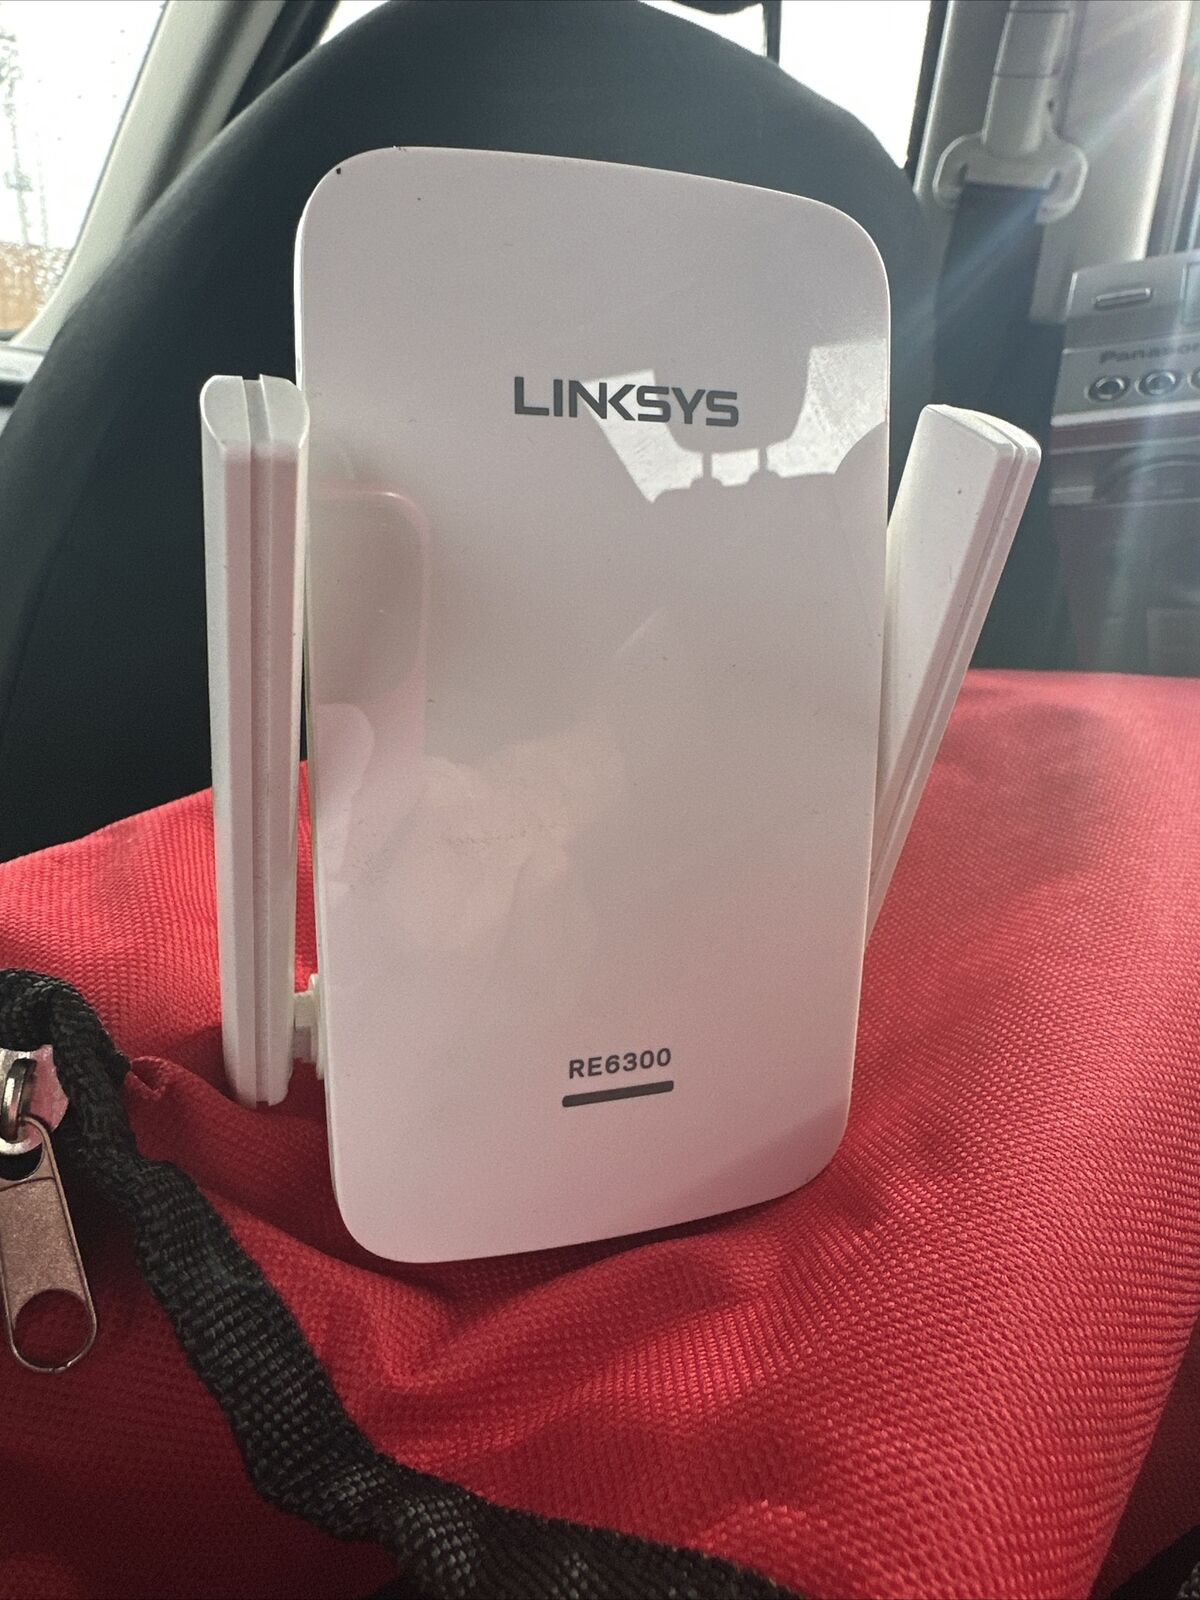 Linksys RE6300 Boost Dual Band WiFi Extender / Repeater